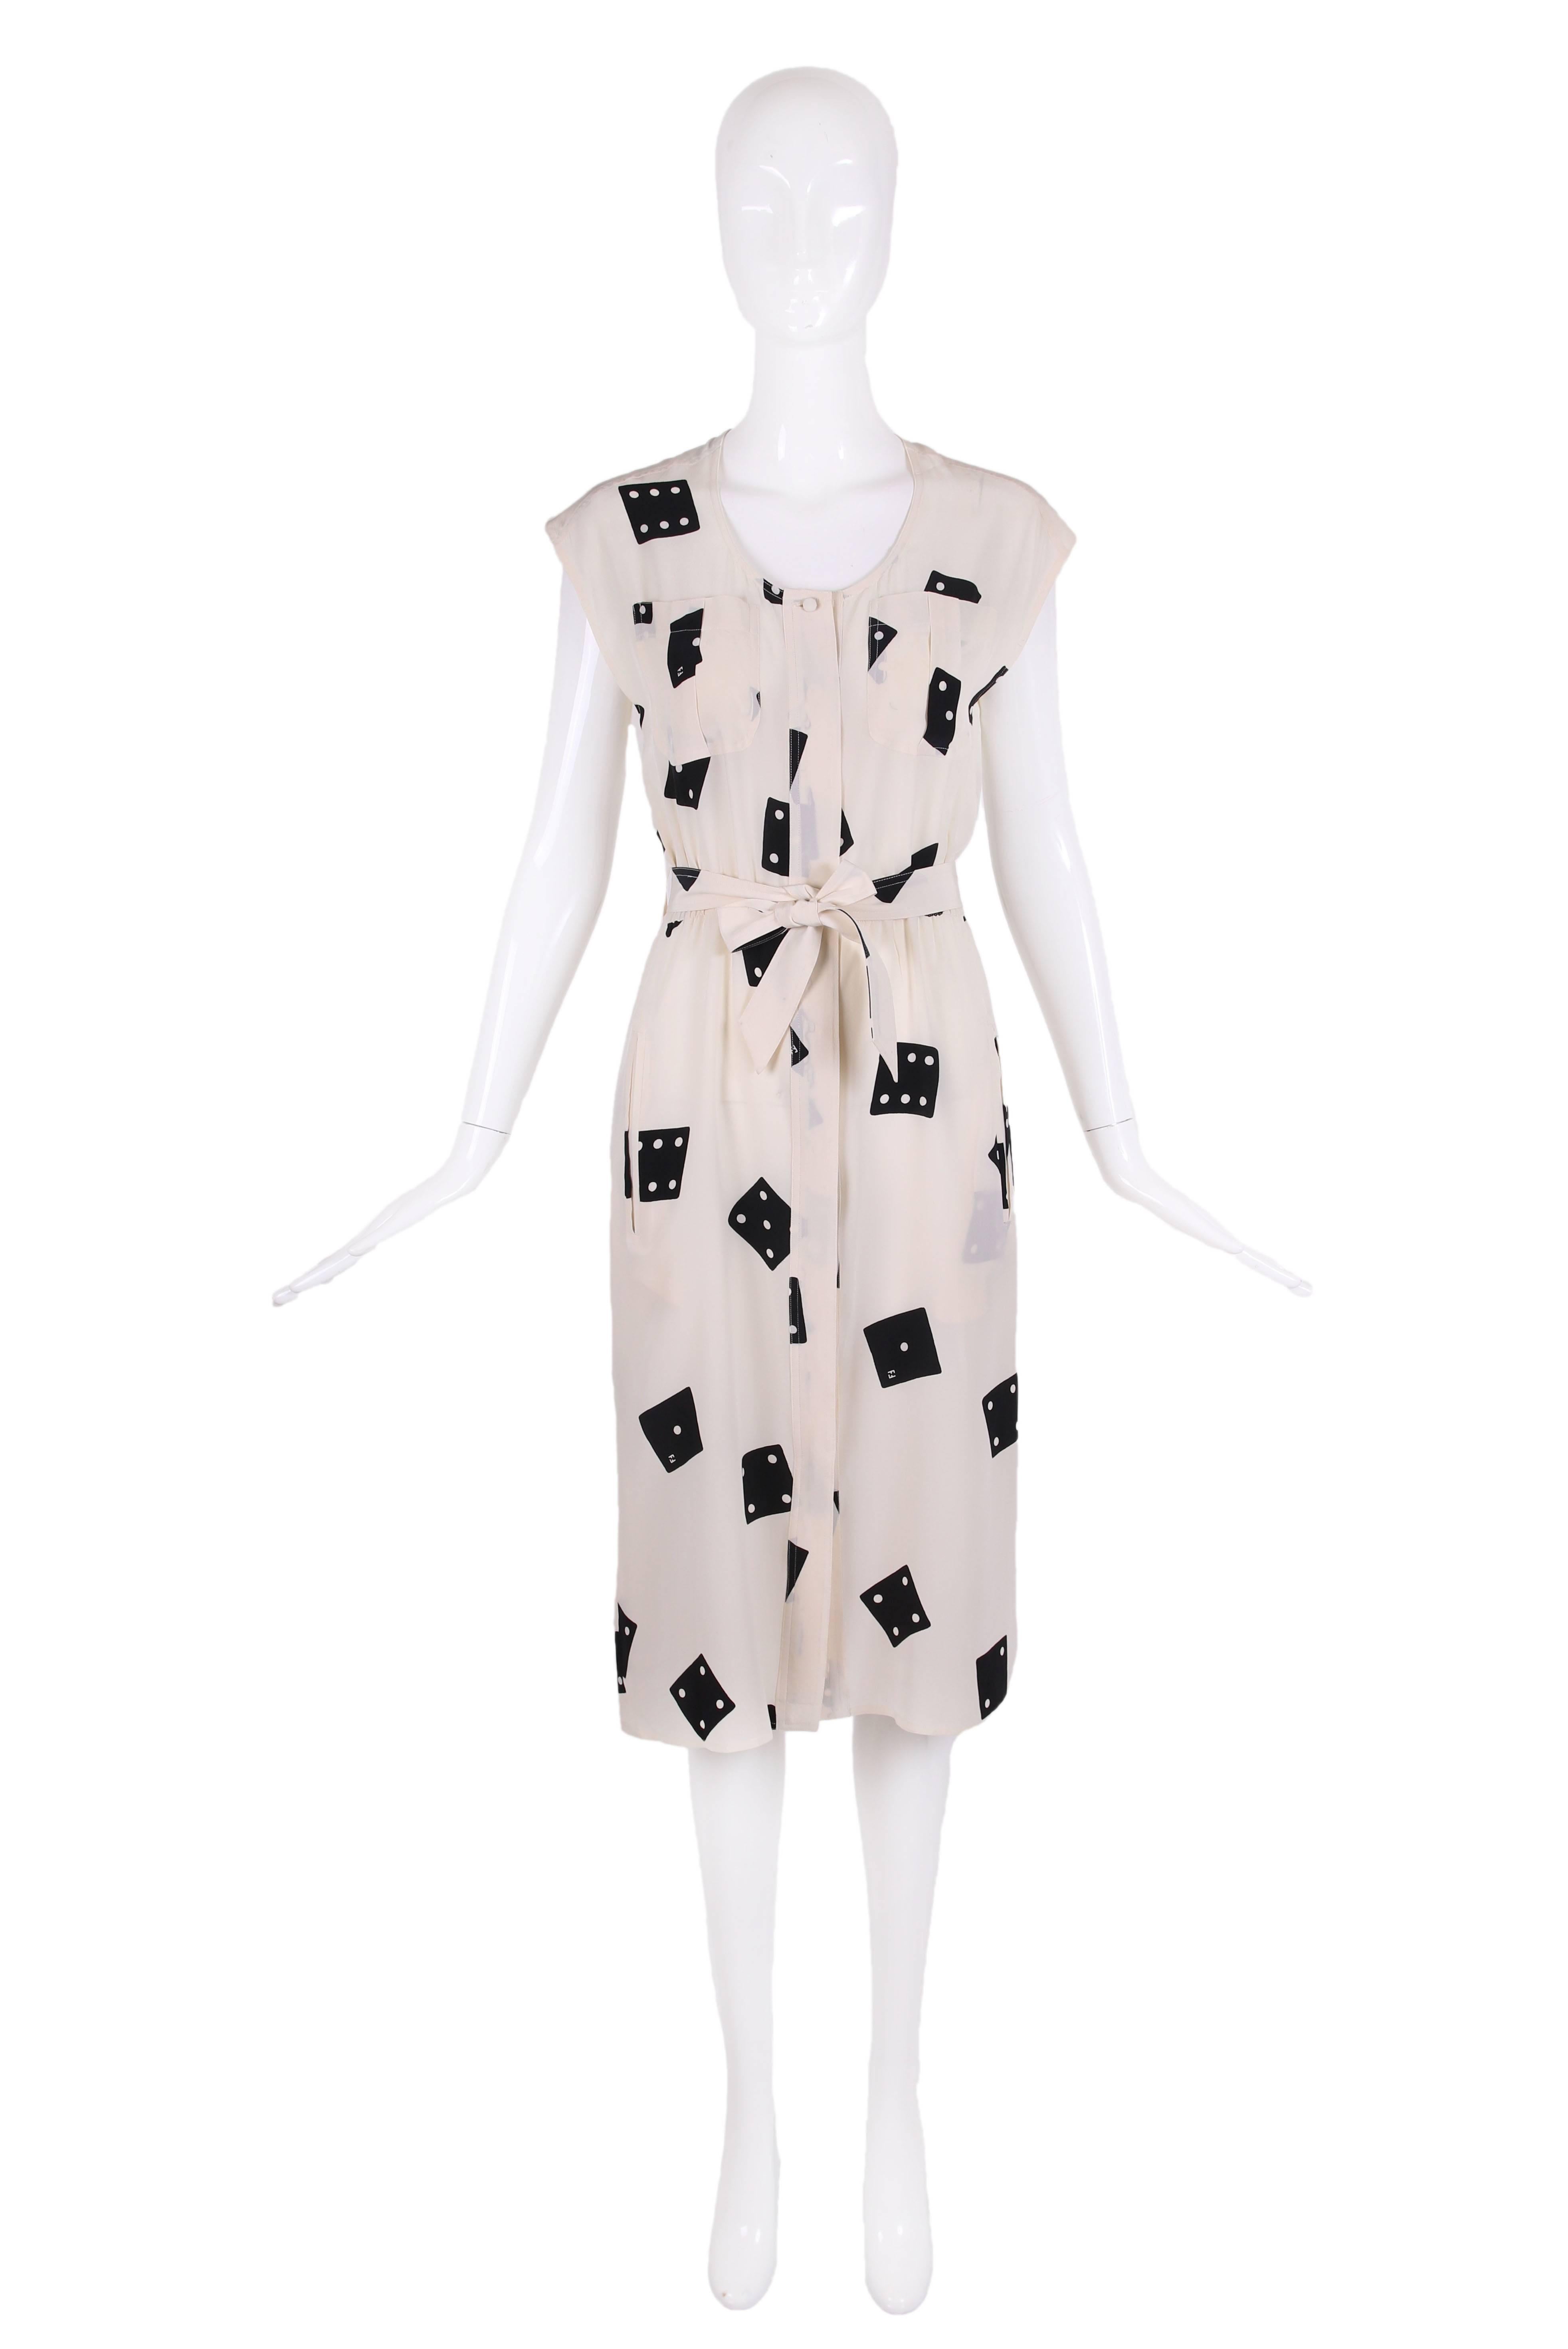 Vintage Fendi white silk sleeveless day dress with black dice print & self belt. In excellent condition - please see measurements.